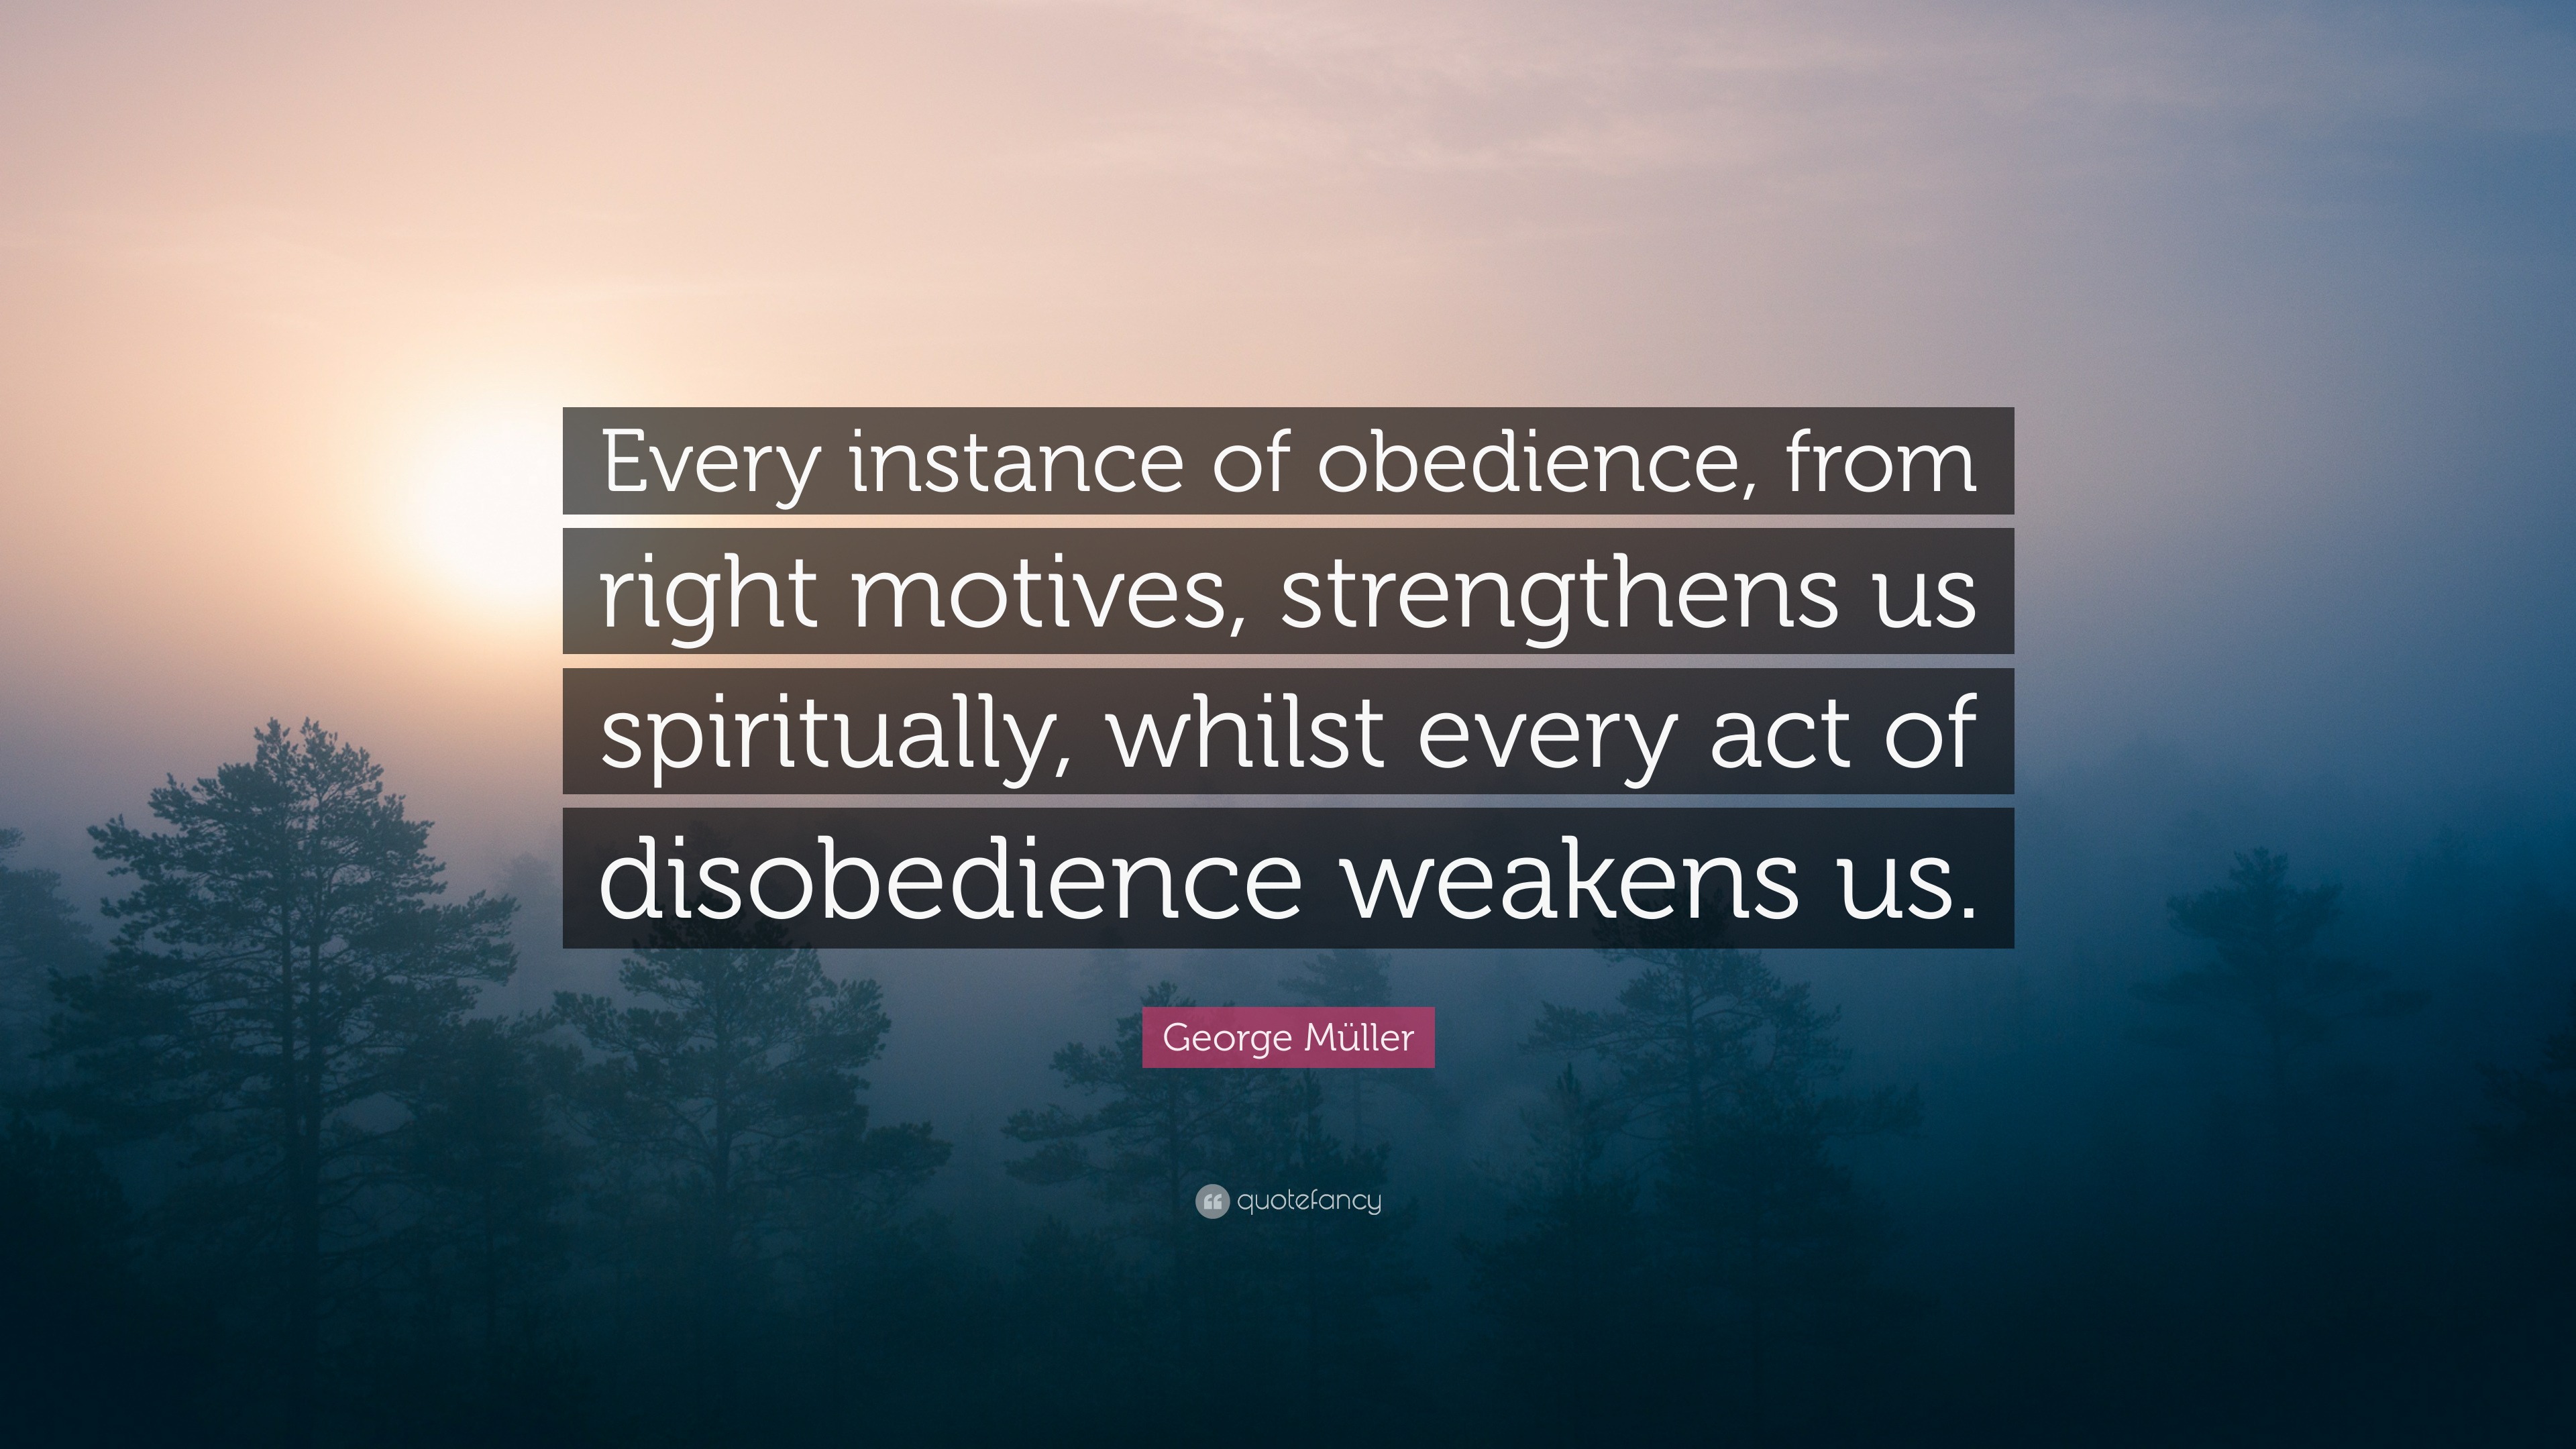 George Müller Quote: “Every instance of obedience, from right motives